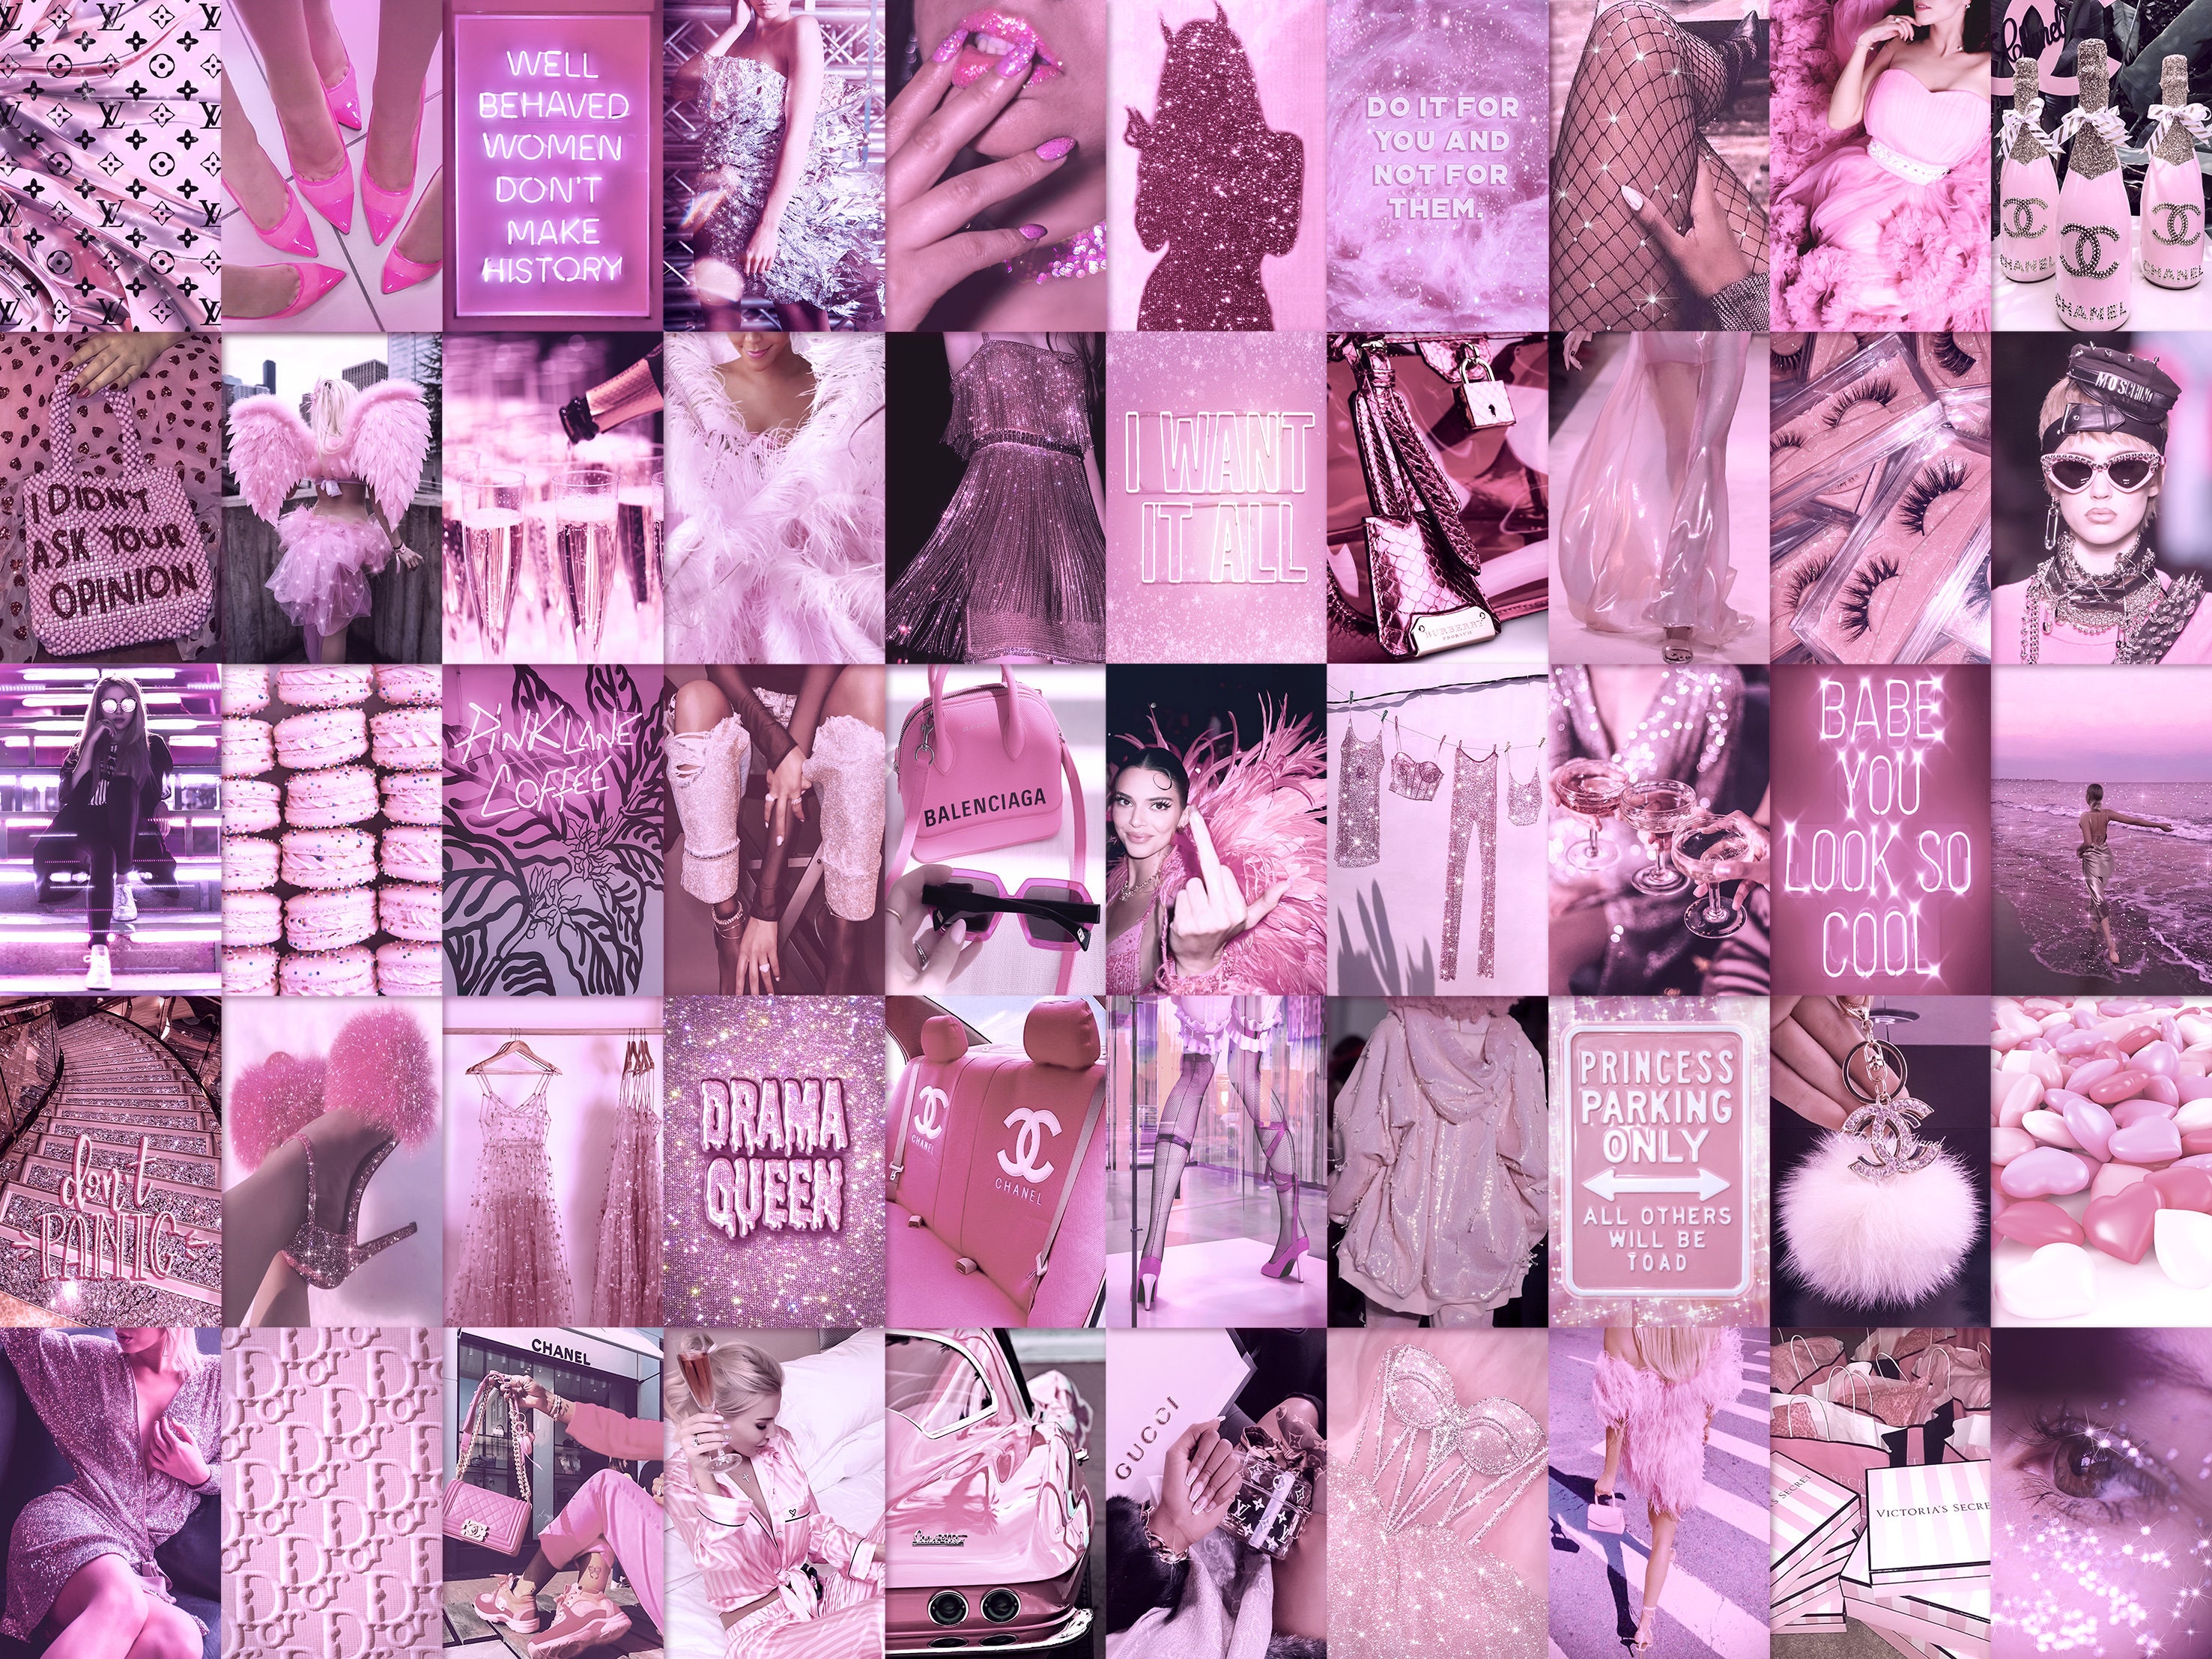 Boujee Blush Pink Aesthetic Photo Collage Kit of 80 Pieces / 